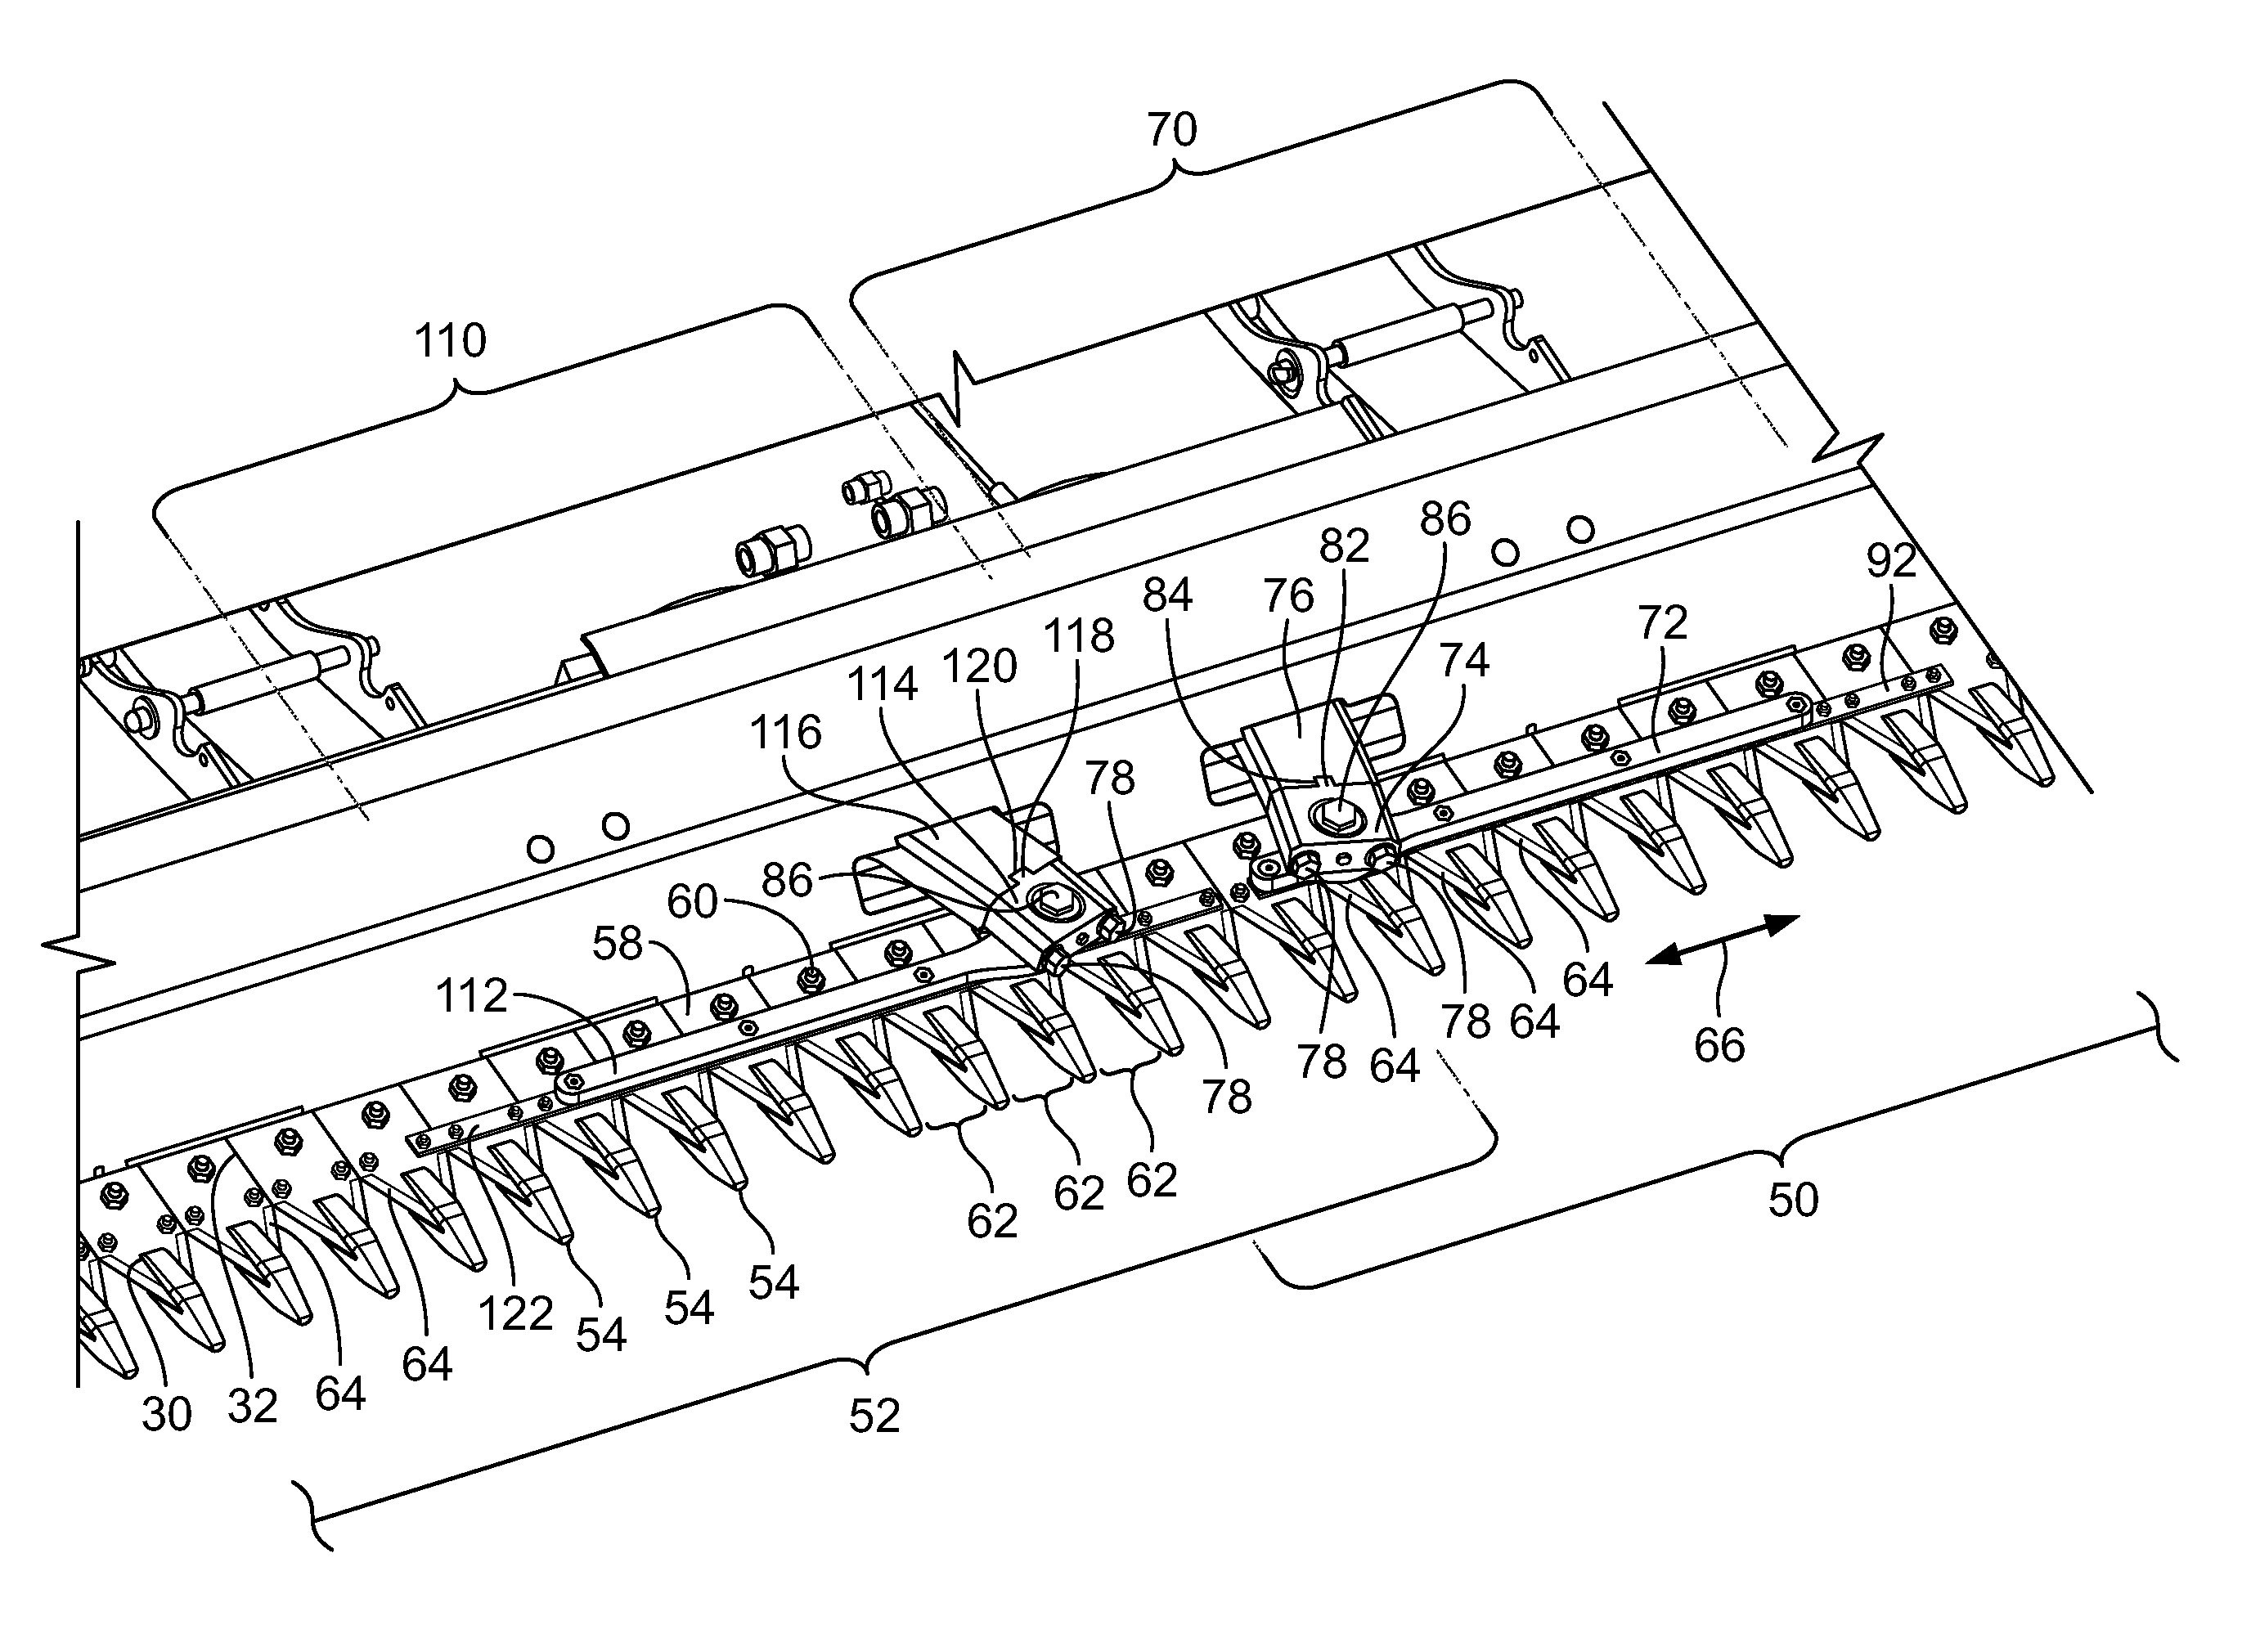 Plant-cutting assembly for a header